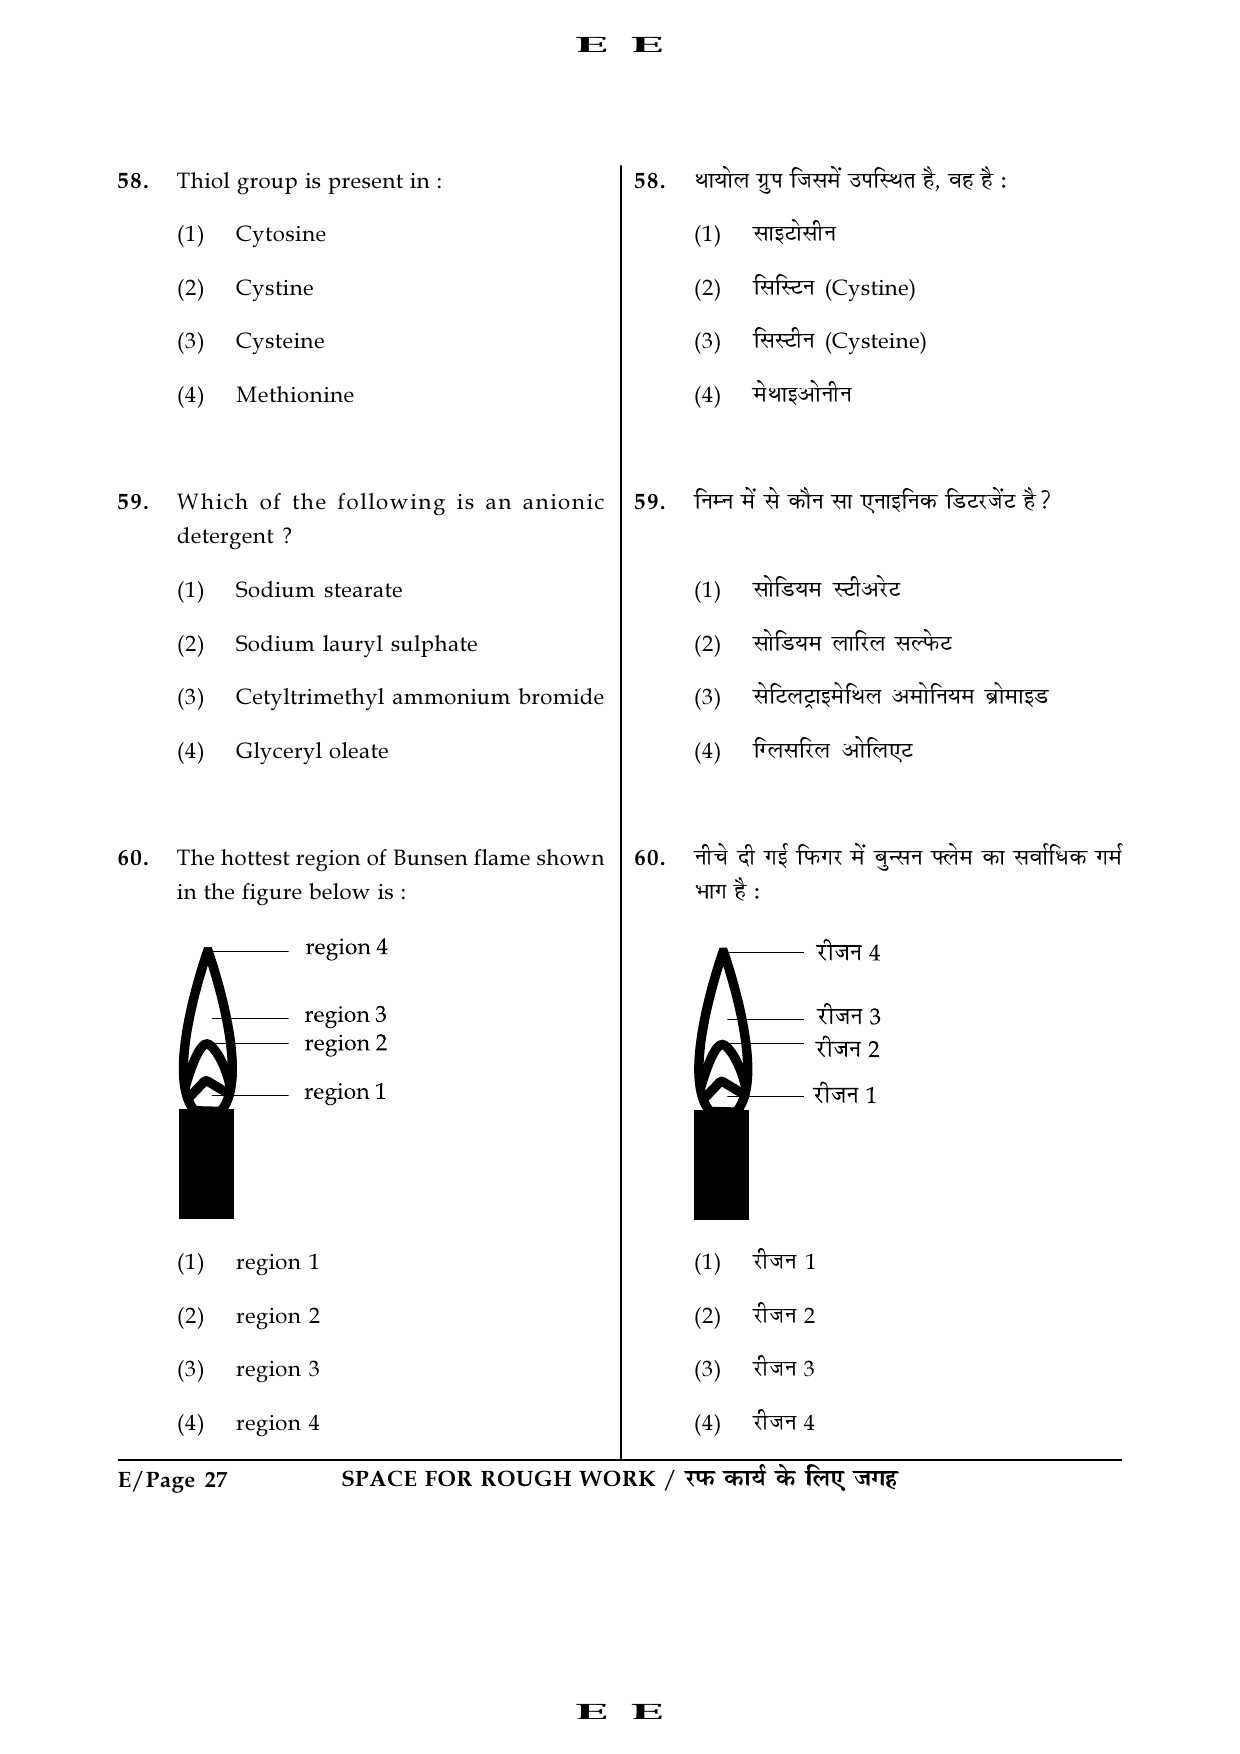 JEE Main Exam Question Paper 2016 Booklet E 27